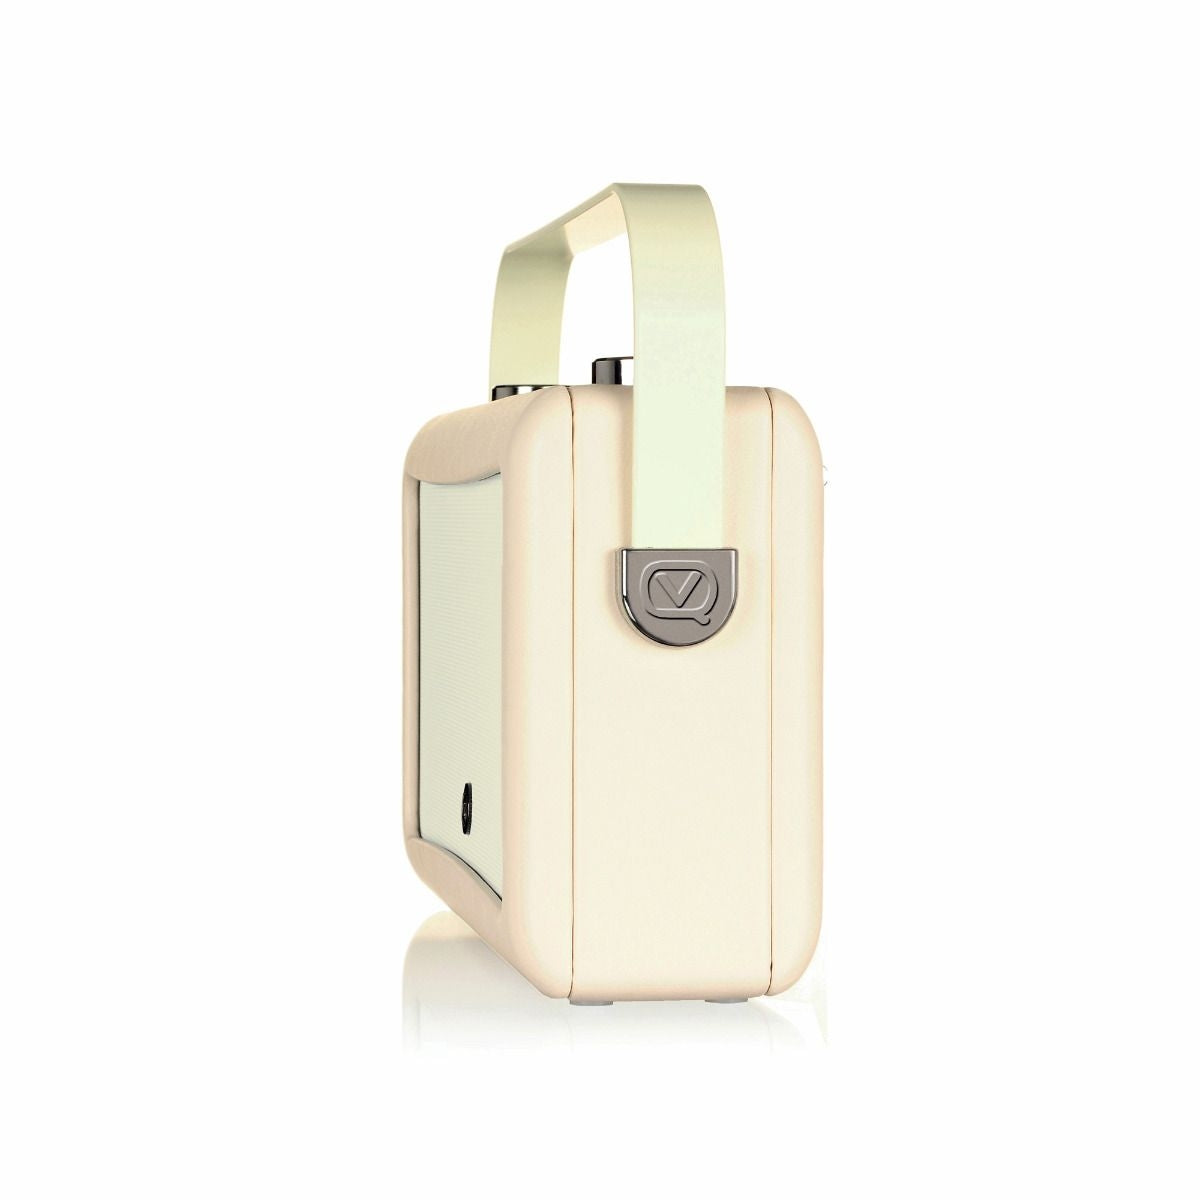 VQ Hepburn Mk II  Portable DAB+/FM Radio & Bluetooth Speaker with Rechargeable Battery Pack in Cream - 5